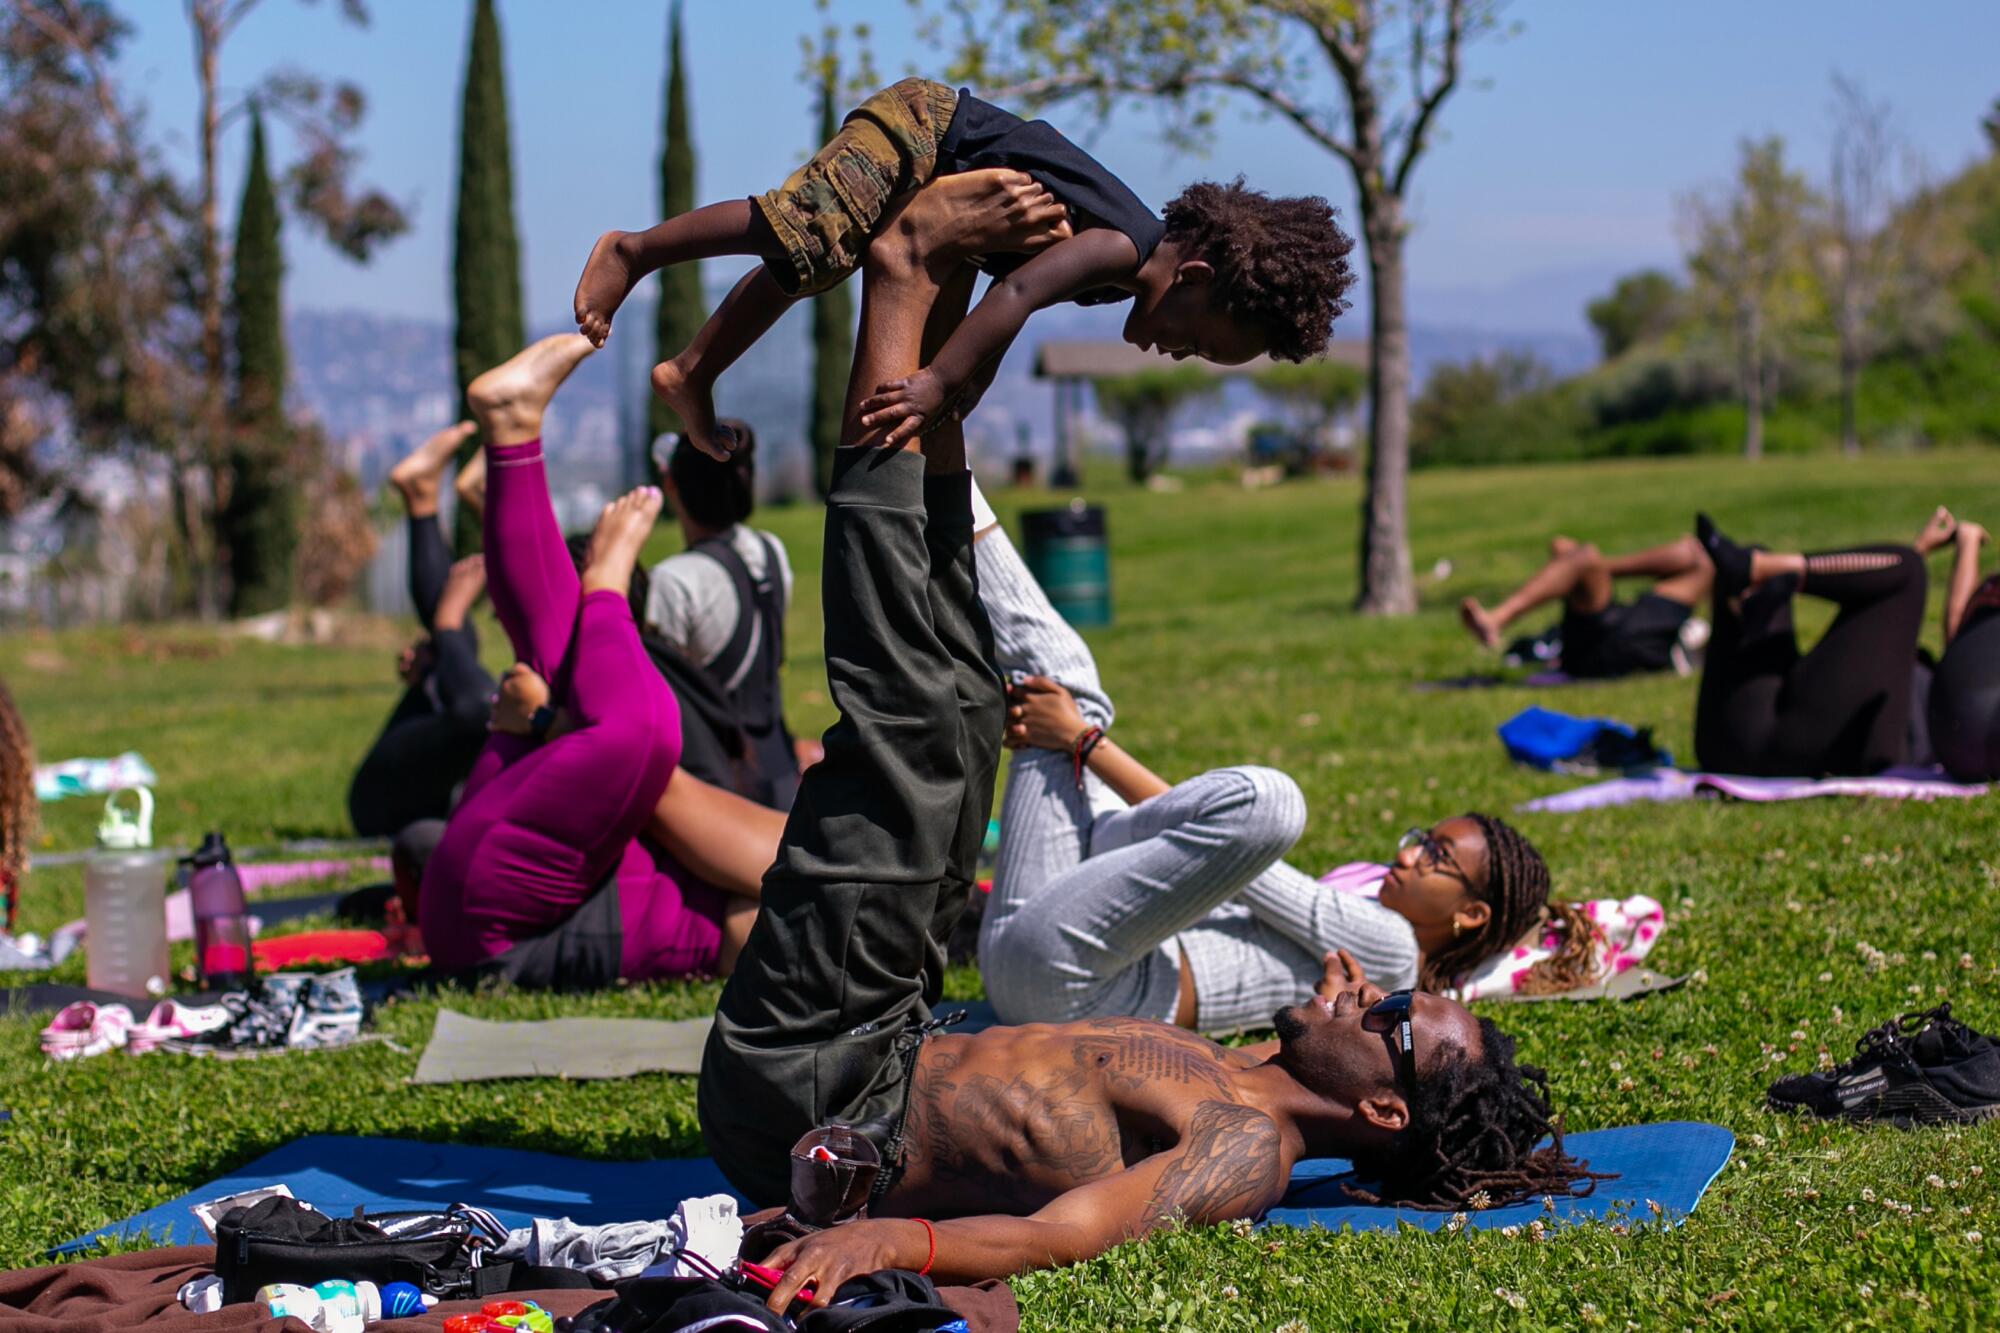 Several people lie on mats and raise their legs up. One man lifts a child on his raised feet.